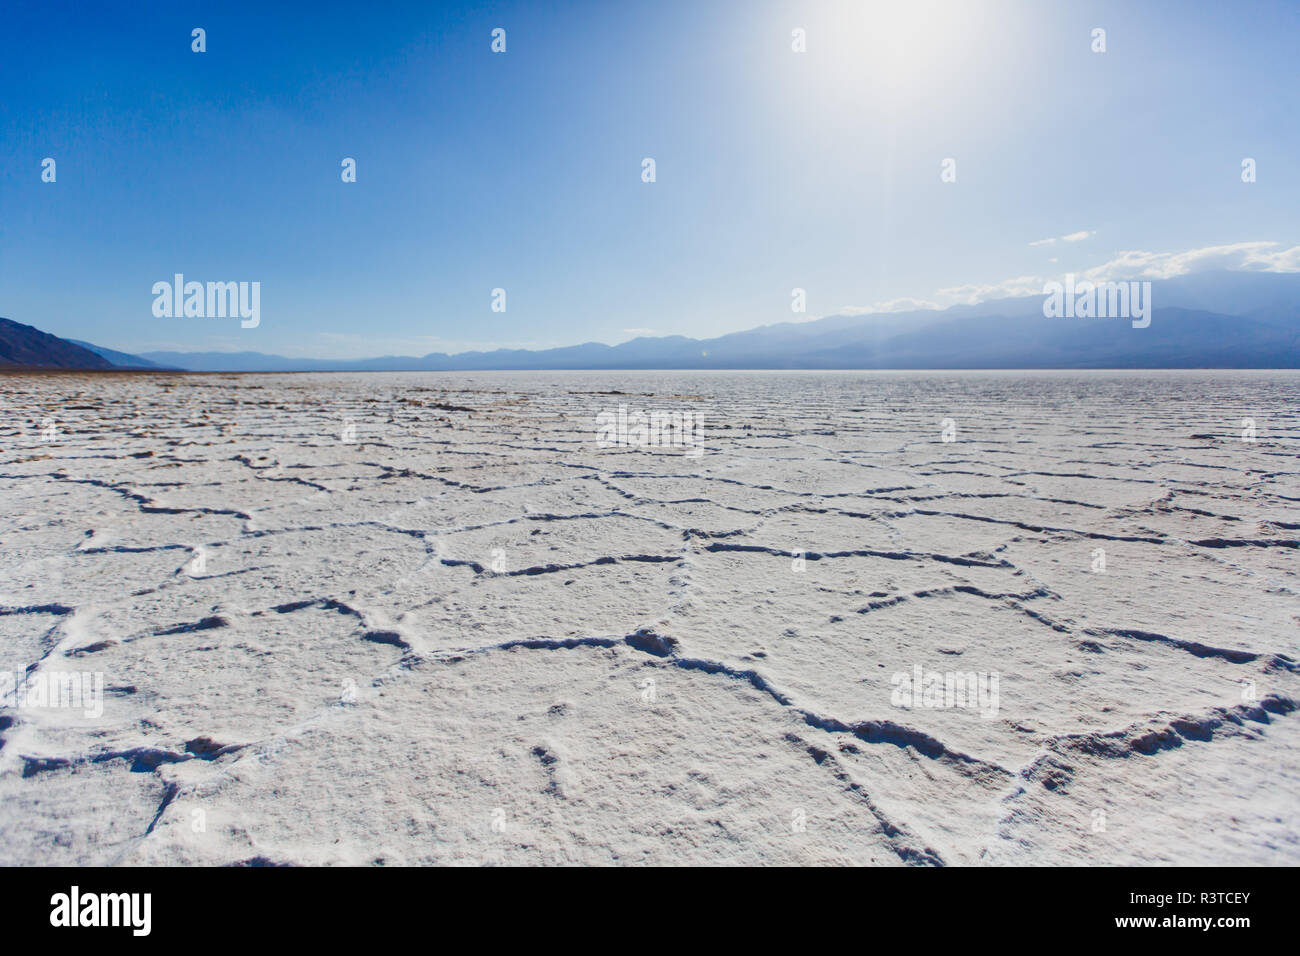 Vibrant view of Badwater basin, endorheic basin in Death Valley National Park, Death Valley, Inyo County California, USA Stock Photo